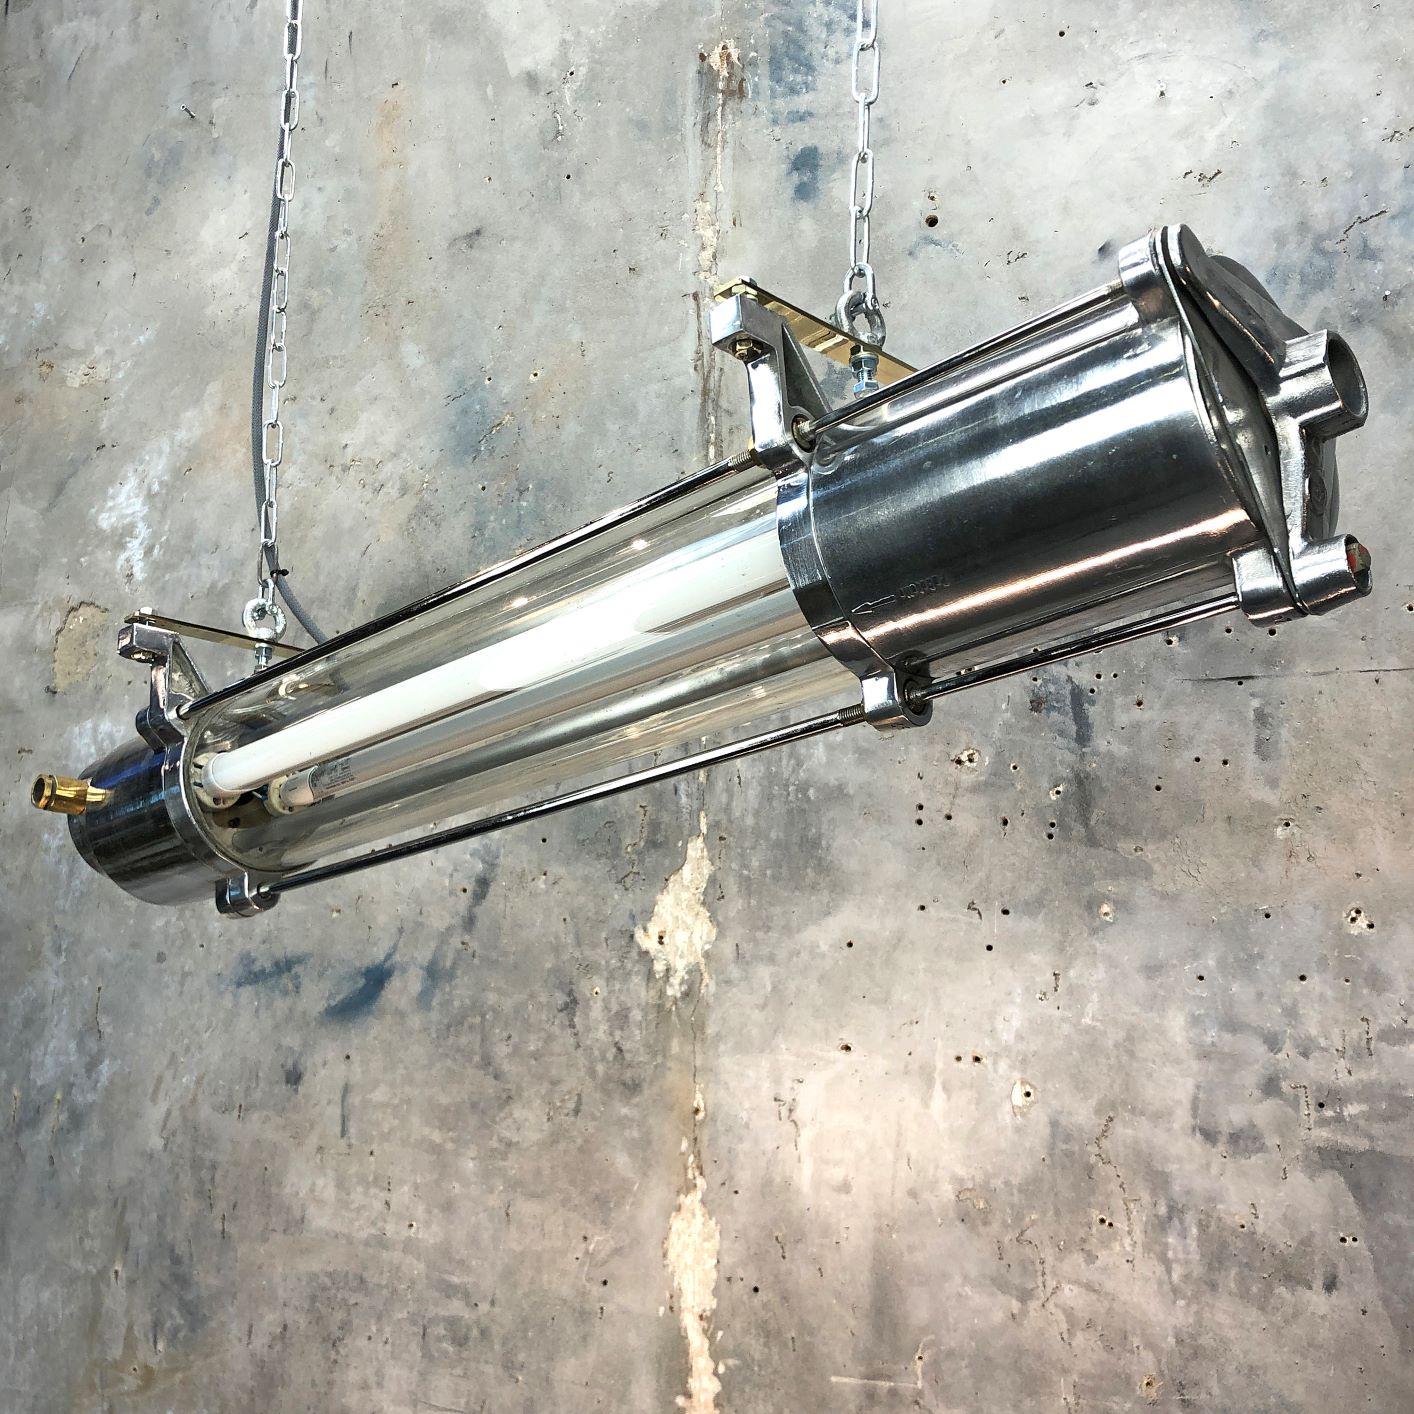 A vintage Industrial flameproof ceiling striplight / tube light made by Wittenburg of Germany. Originally designed for hazardous areas in factories and on cargo ships.

The build is of the highest quality and extremely robust made borosilicate